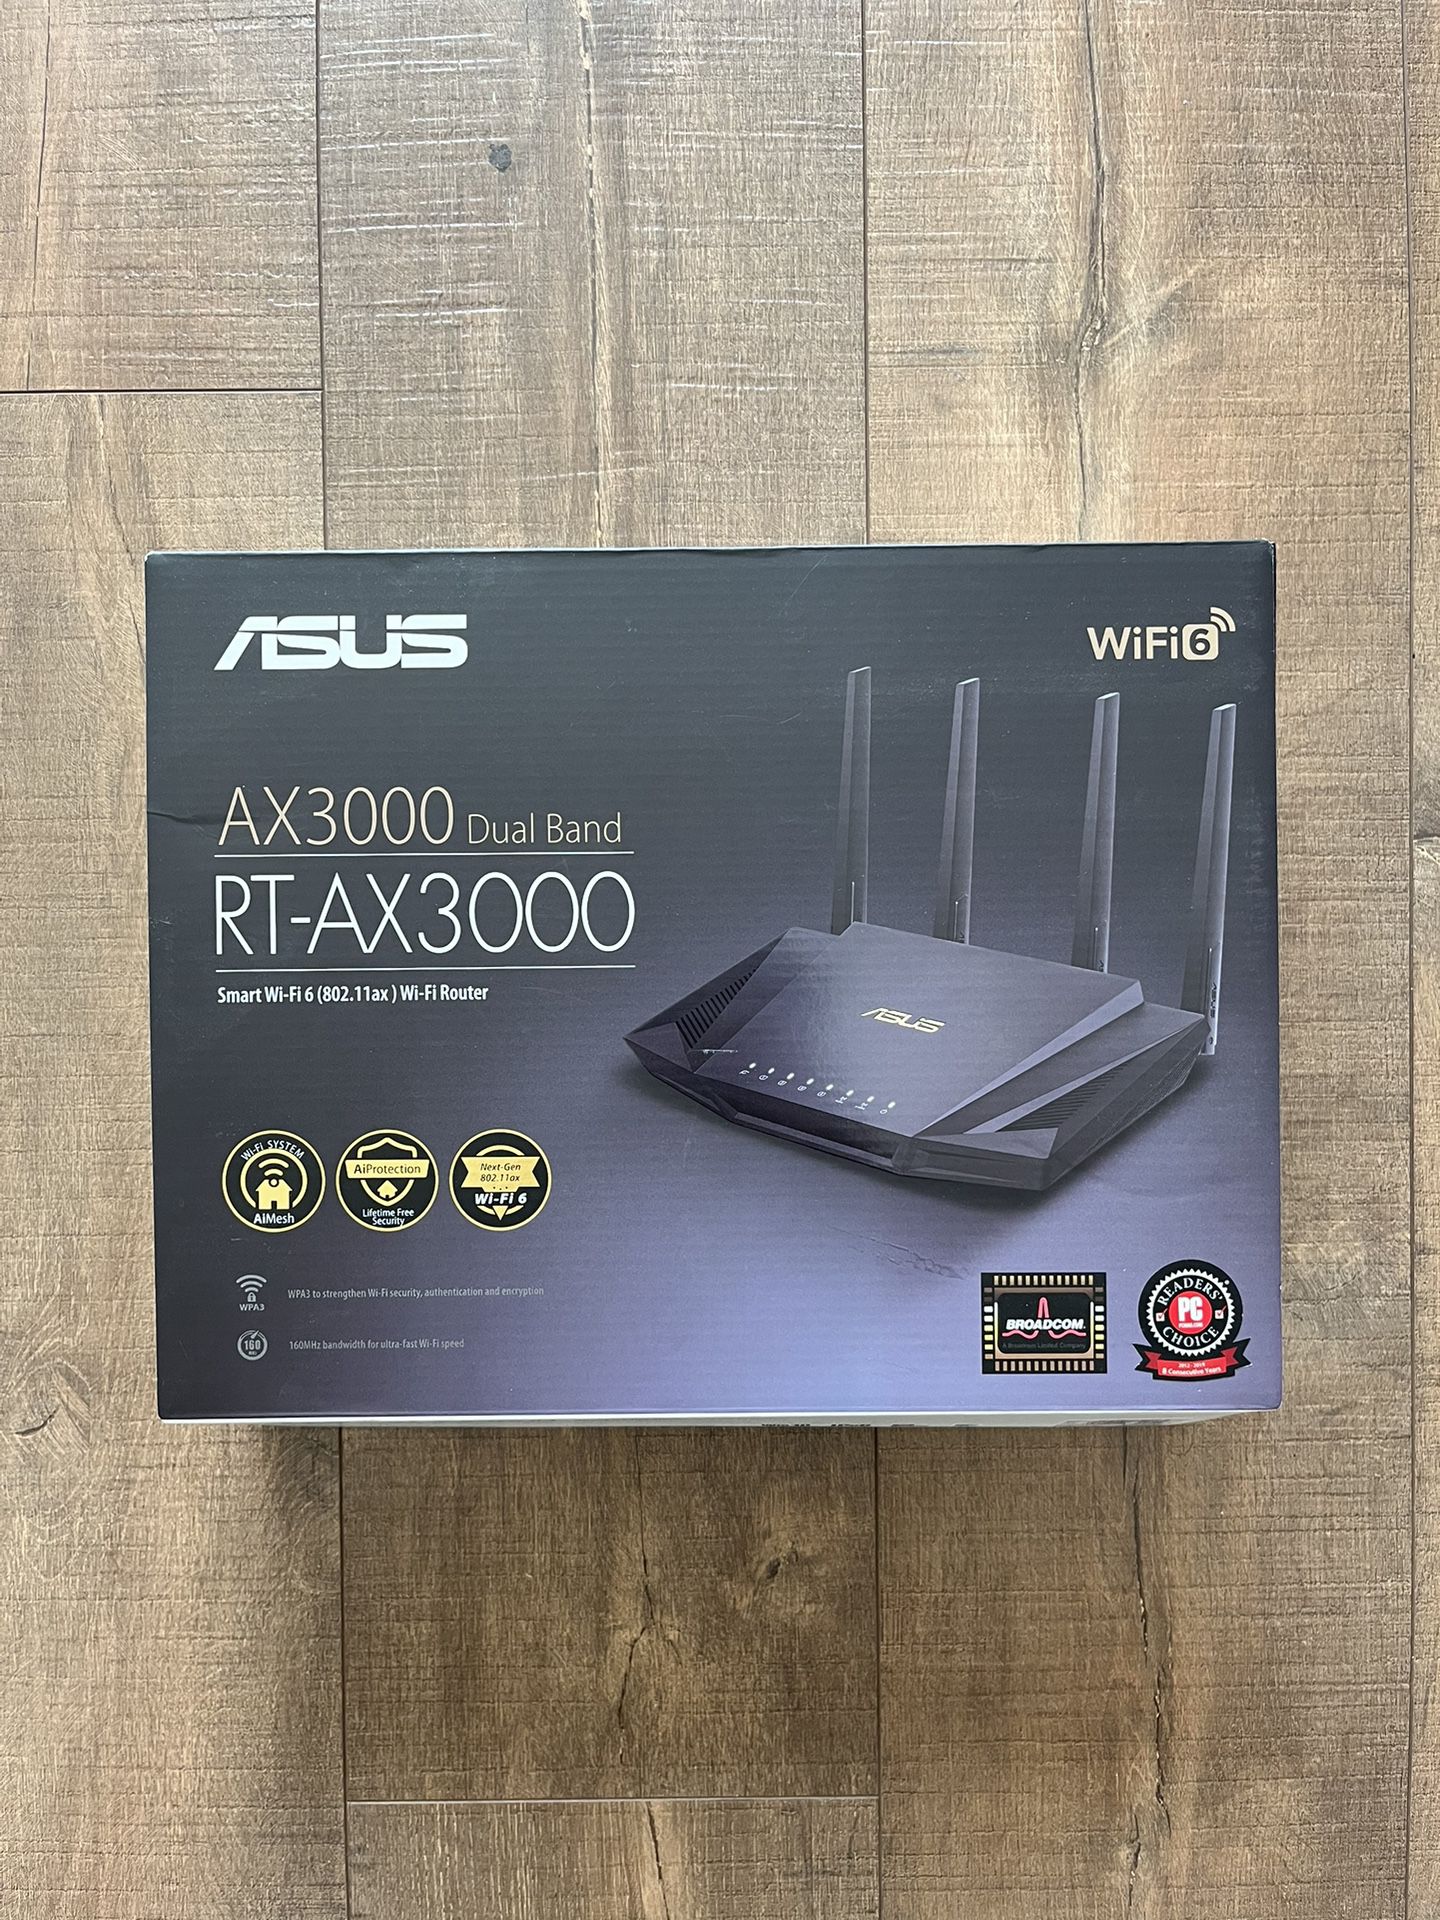 Asus AX3000 Dual Band RT-AX3000 WiFi 6 Router